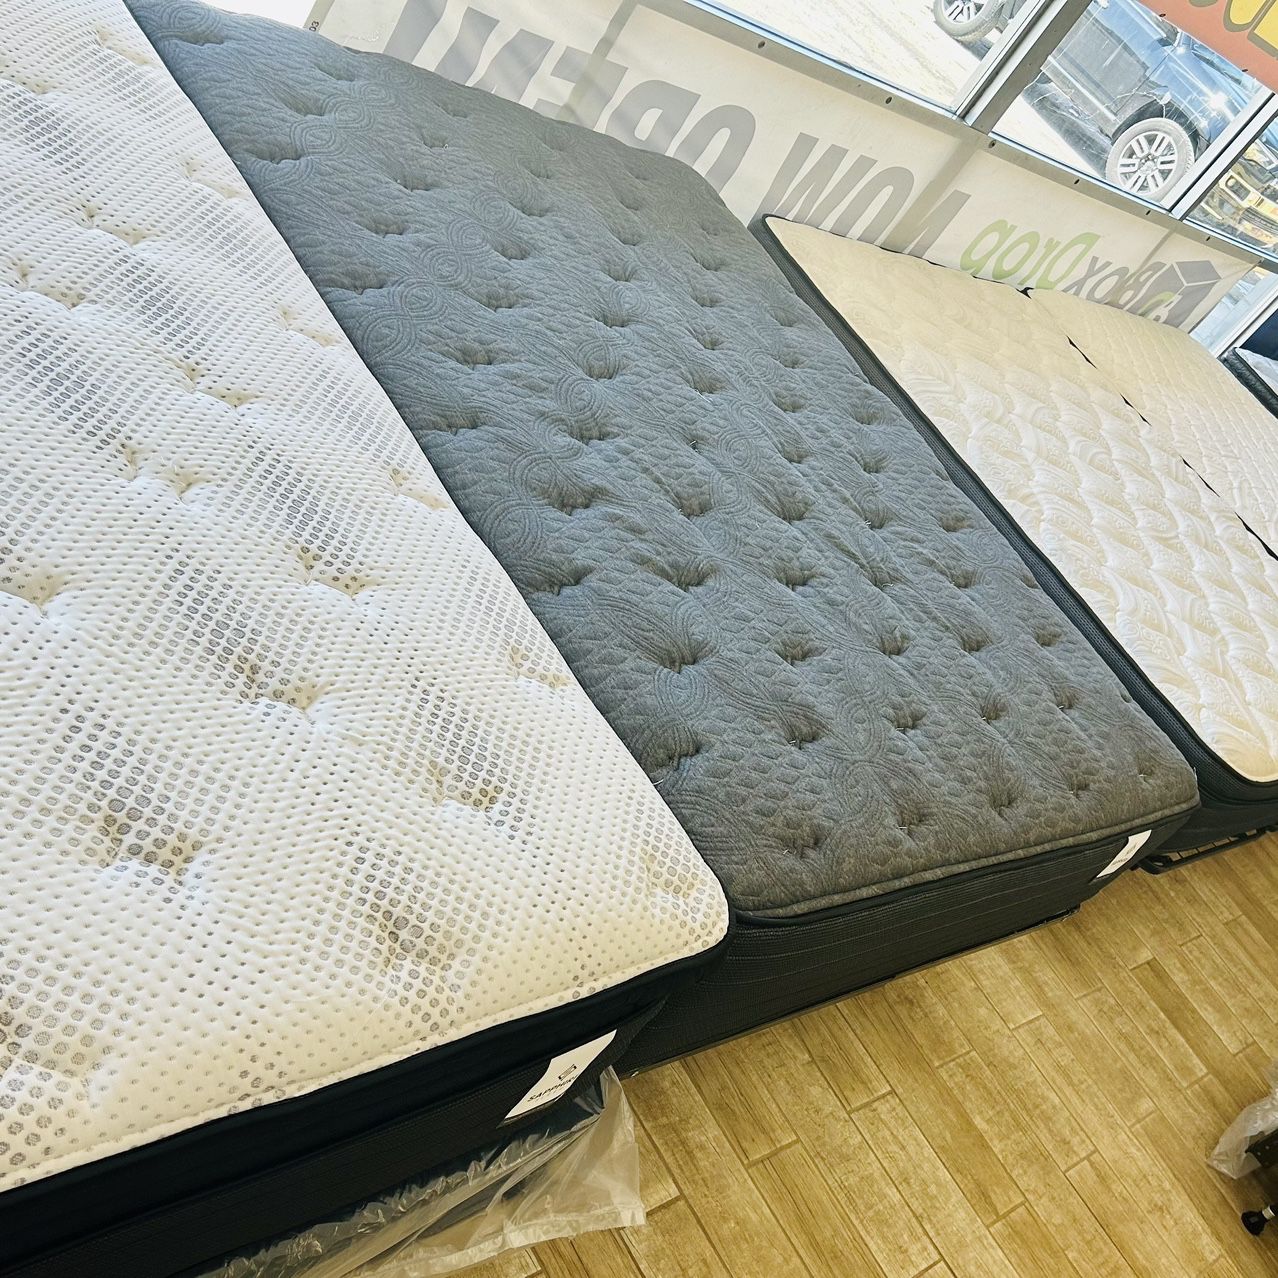 Clearing Out Brand New Mattresses!!!! Way below retail prices!!! (Read Details)